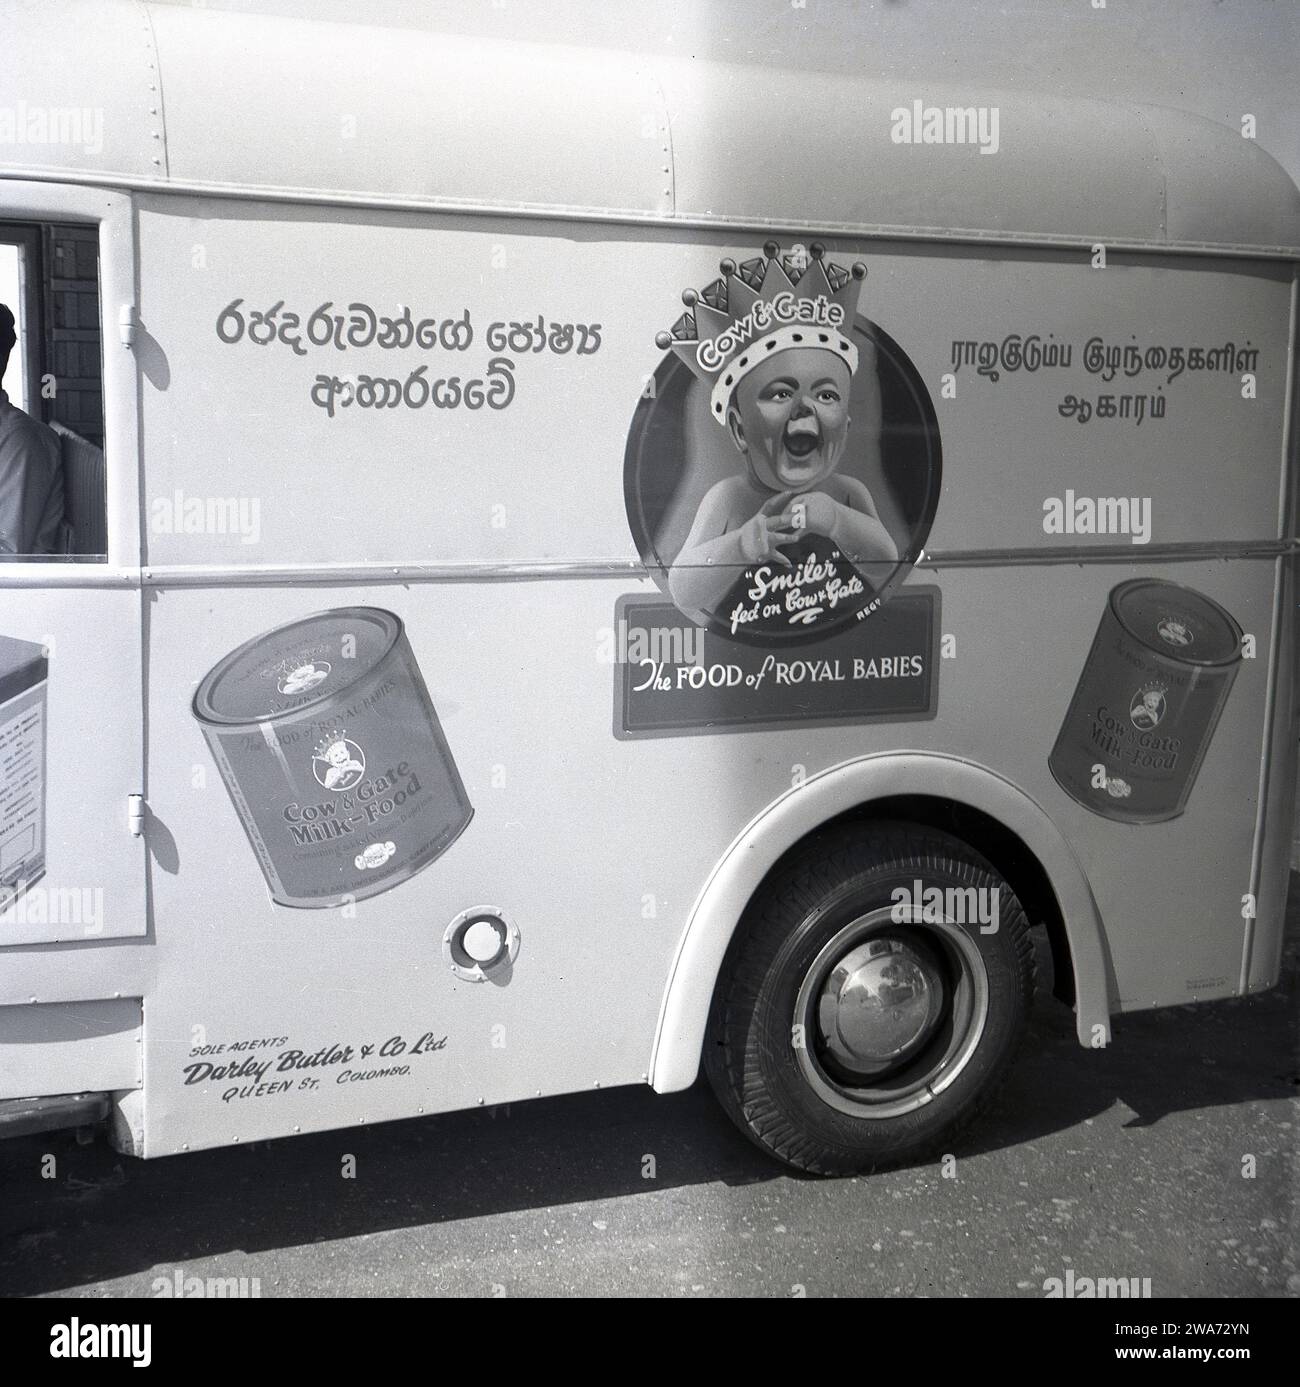 1953, historical, side view of a Commer delivery van on a road in Colombo, Celyon, showing a smiling baby wearing a crown with the strapline, 'the Food of Royal Babies' and tins of Cow & Gate Milk-Food. Sole Agents: Darley Butler & Co Ltd, Queen St, Colombo. The Cow & Gate 'smiler', a happy, healthy looking baby, first appeared on its product packaging & adverts in the 1930s. The 'Royal Baby; with a crown on its head dates back to 1937 and the Coronation of Briitsh King George VI, when the English diary company began to use 'royal association' to endorse their baby milk formula. Stock Photo